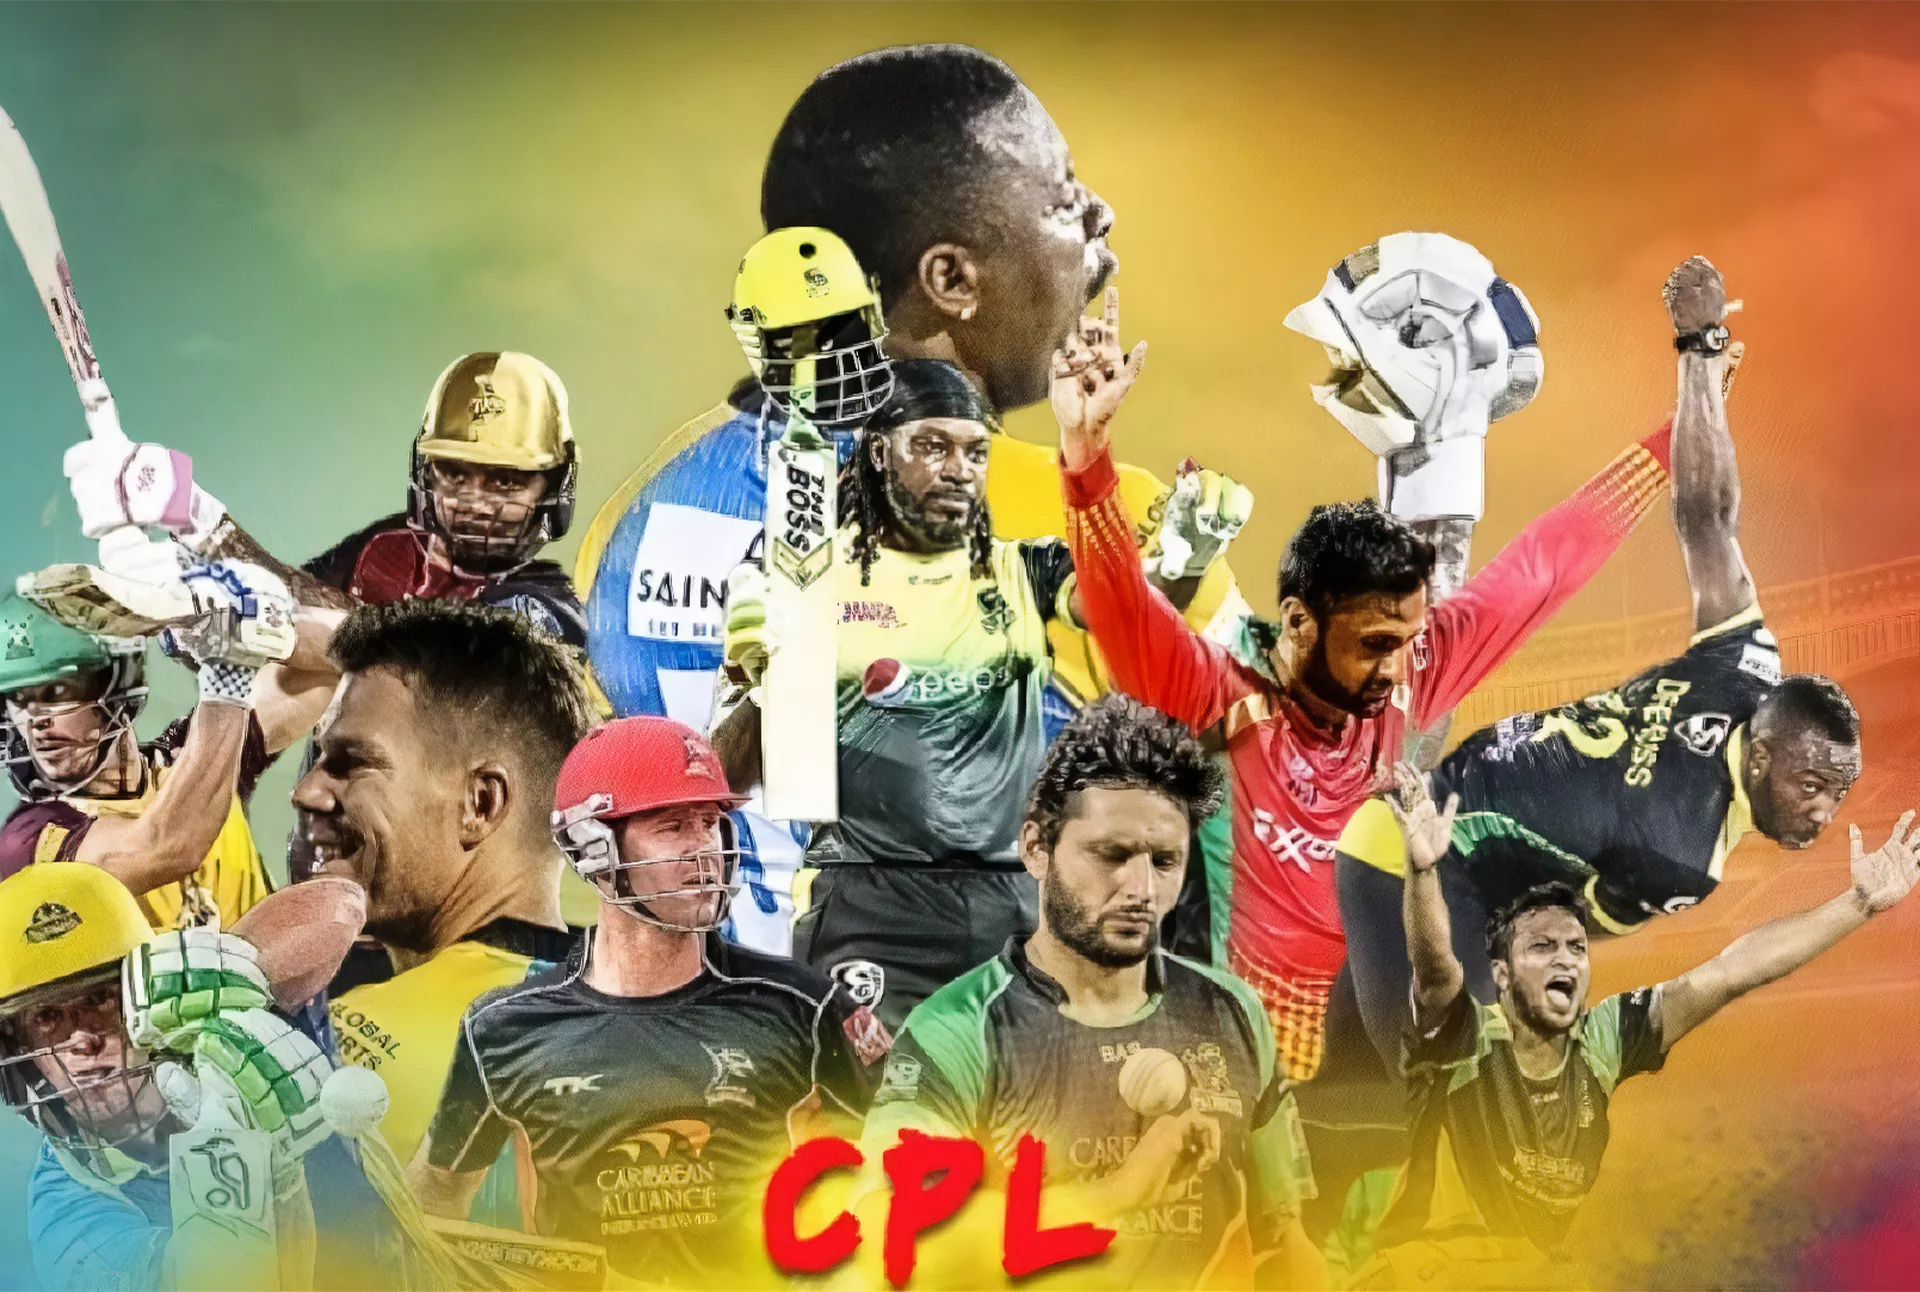 You can place bets on Caribbean Premier League (CPL) after registering on the site.